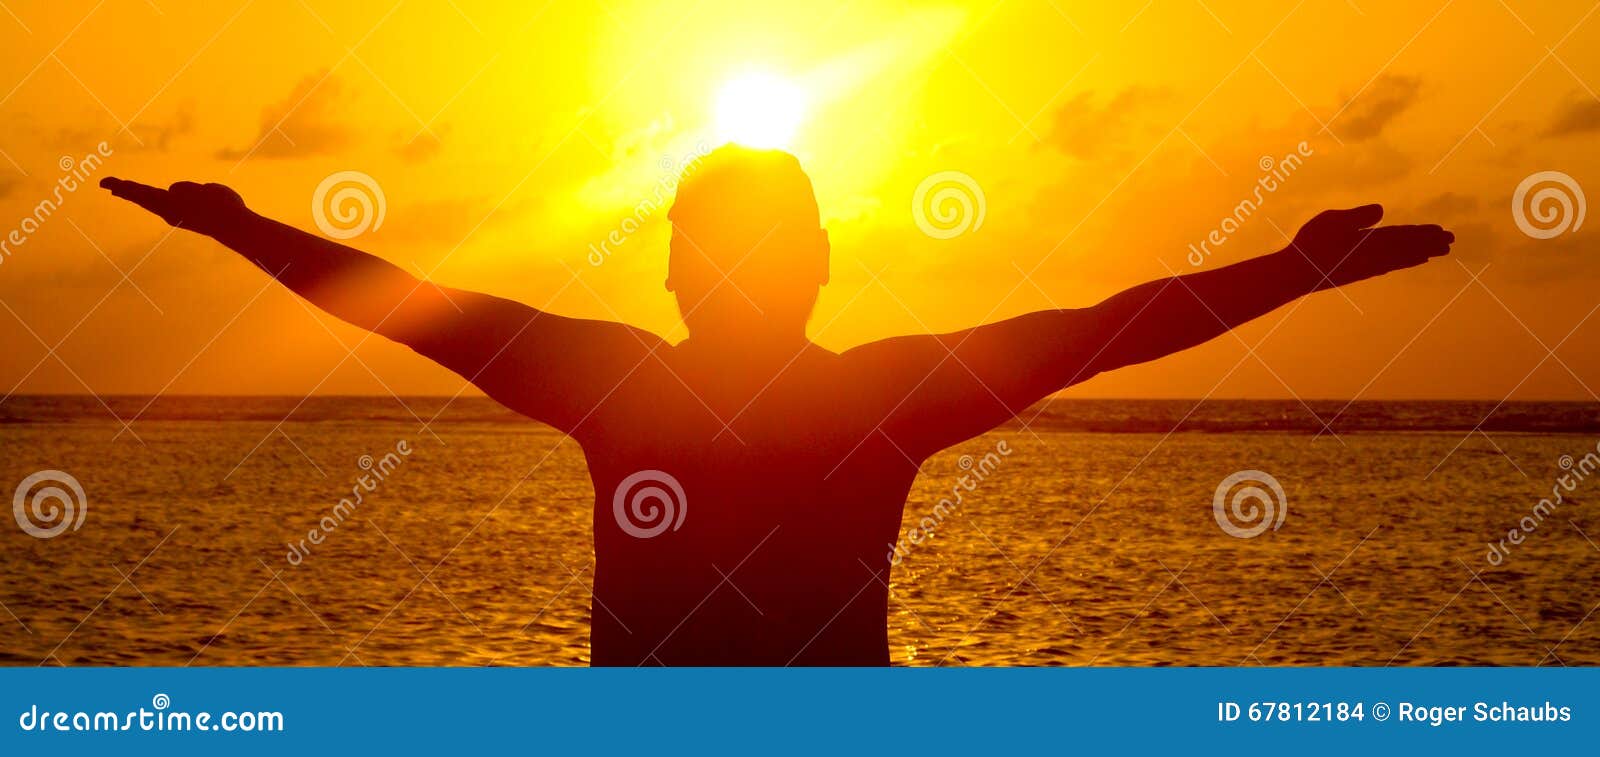 man silhouette of outstretched arms in sunset